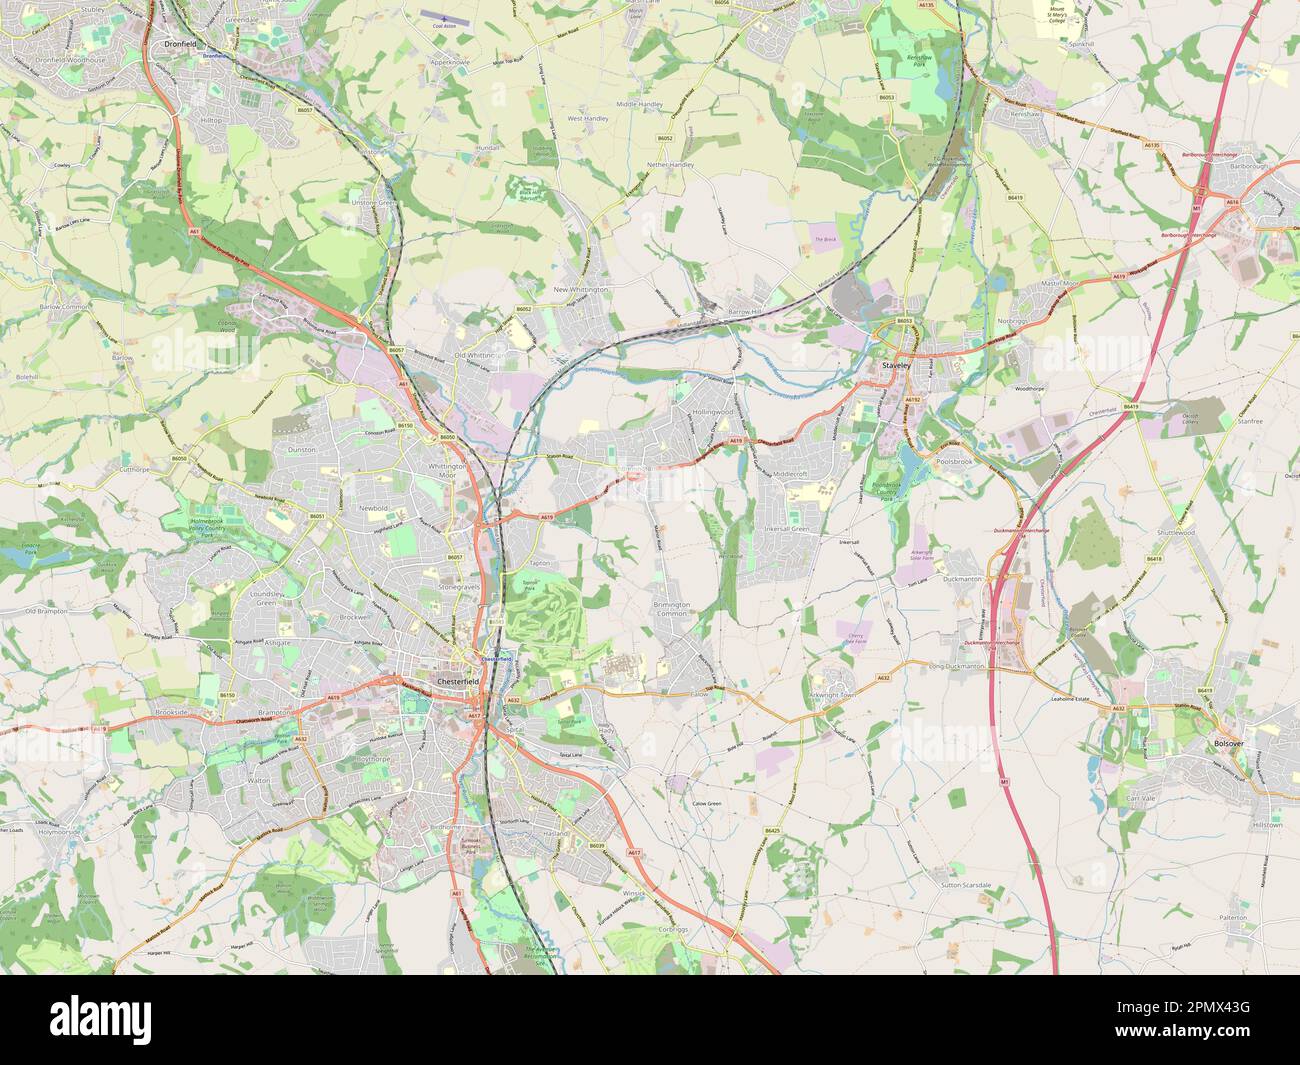 Chesterfield, non metropolitan district of England - Great Britain. Open Street Map Stock Photo